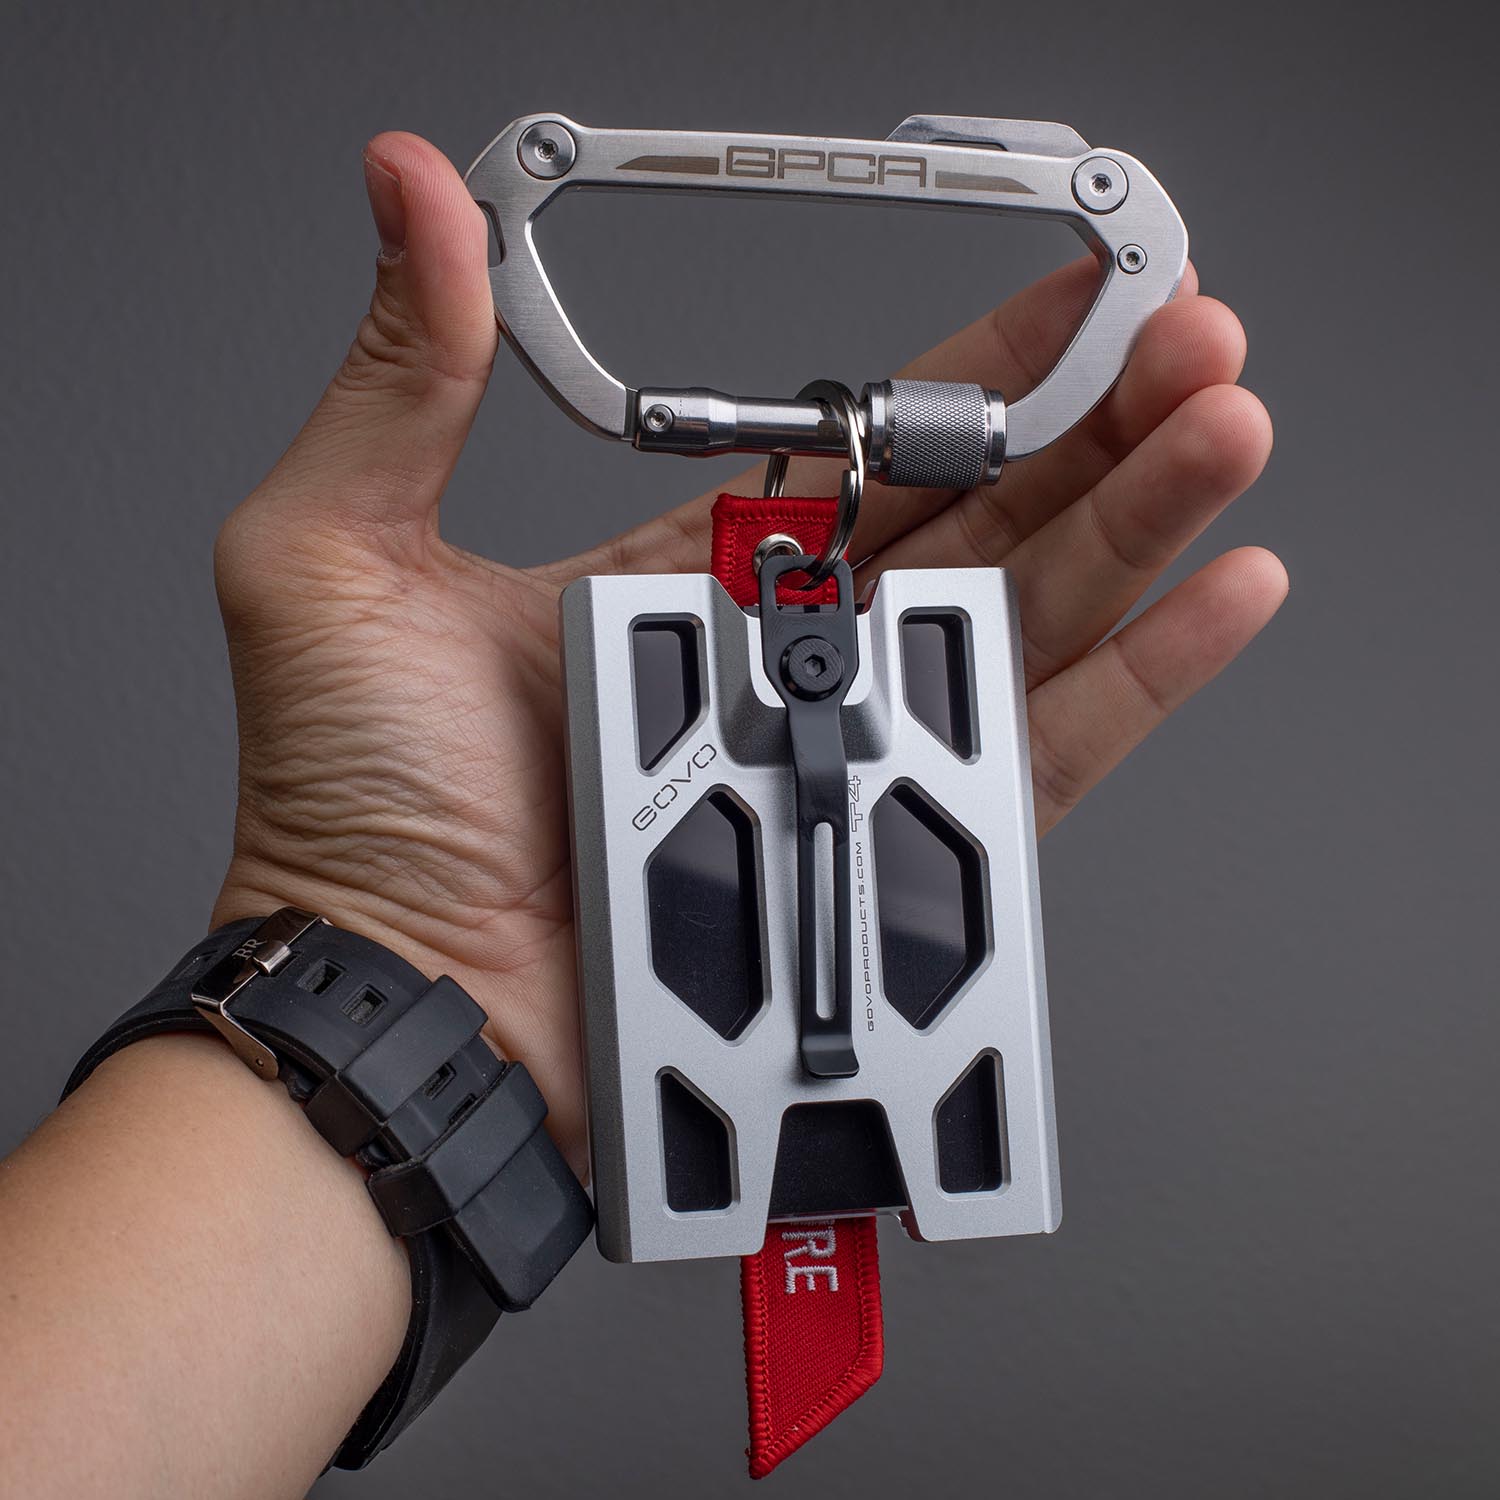 Meet the GPCA Carabiner, your EDC game-changer from California